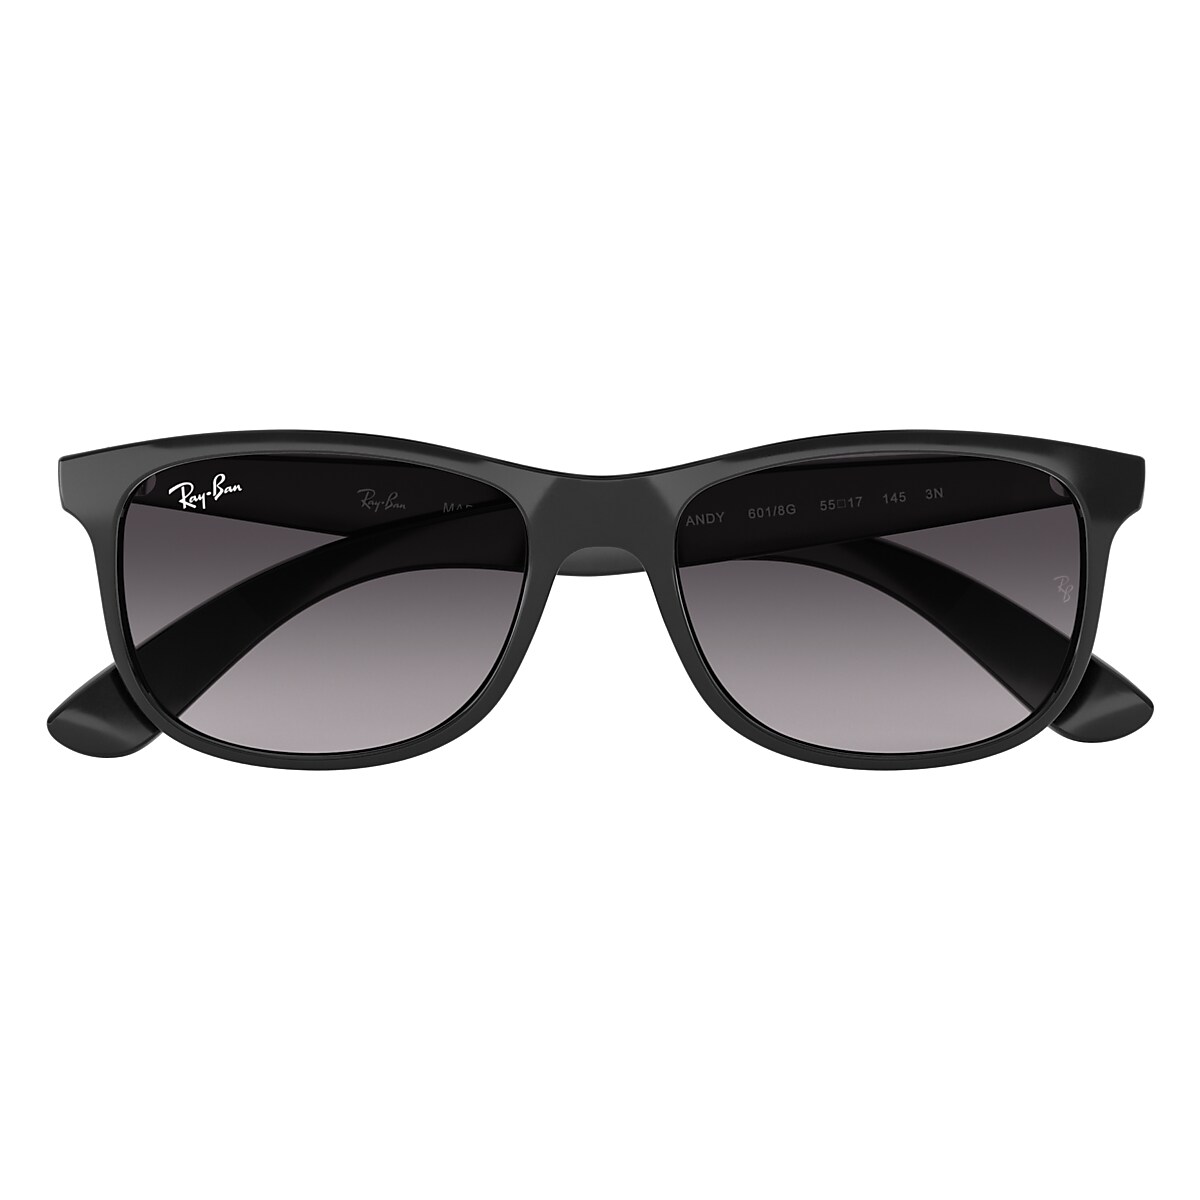 Andy Sunglasses in Black and Grey | Ray-Ban®